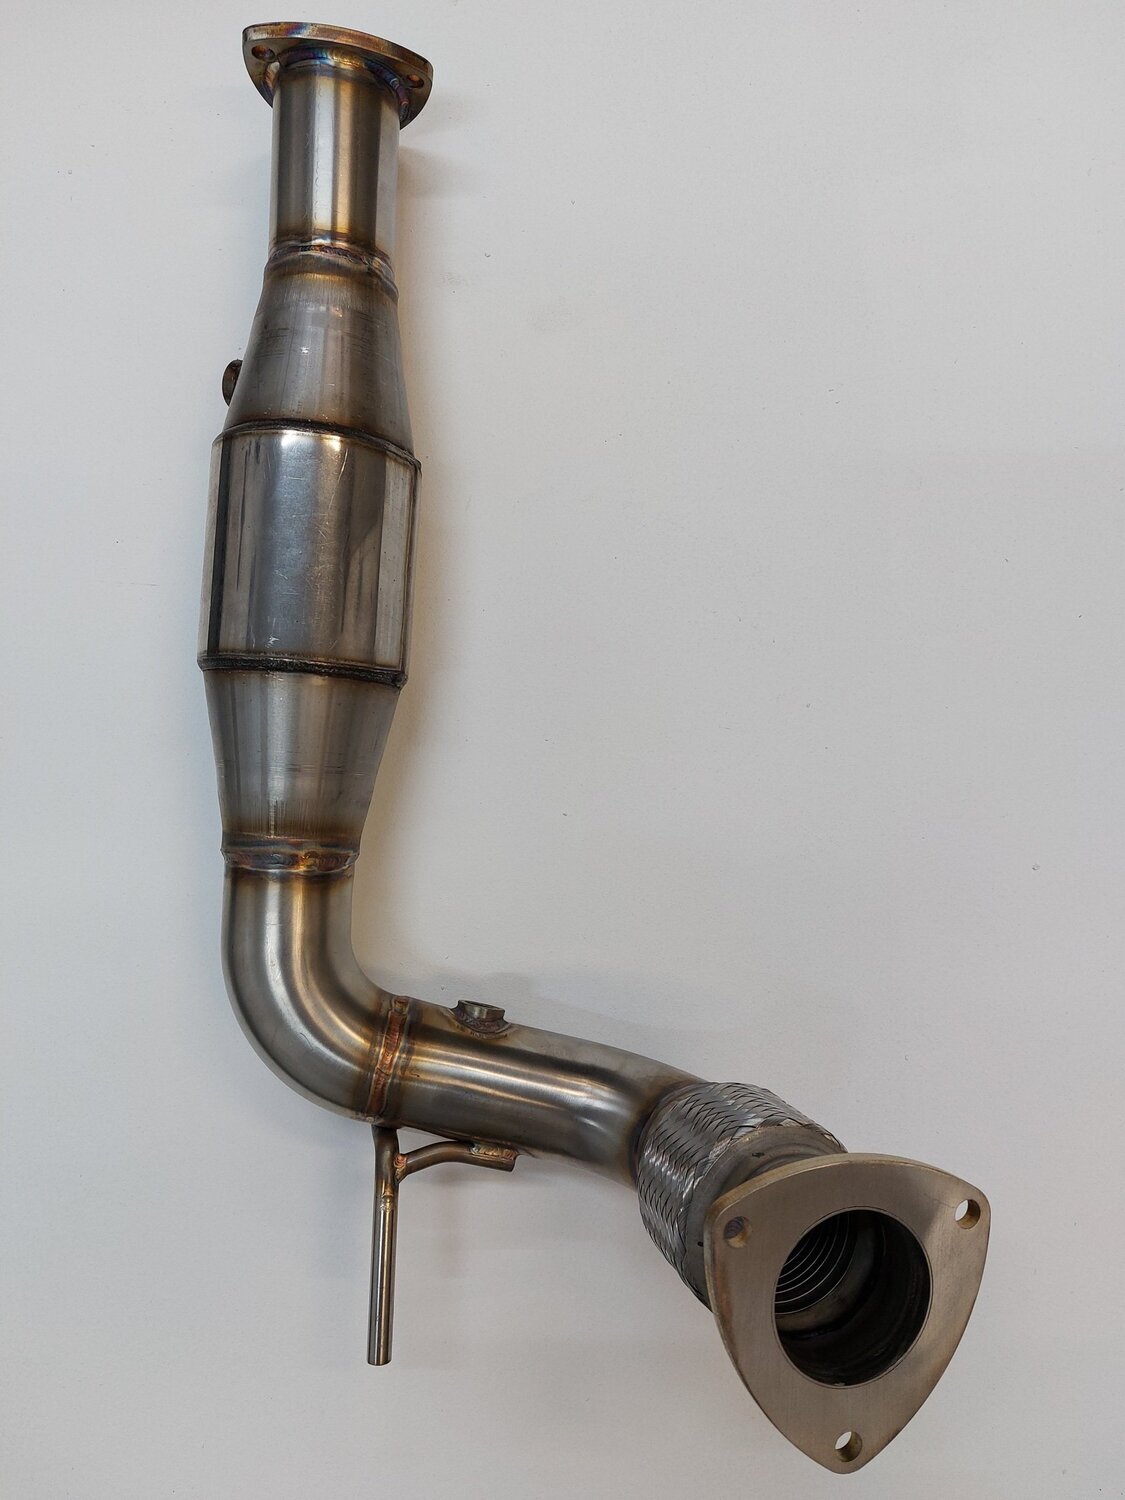 VX220 2.5" downpipe 200 cell cat